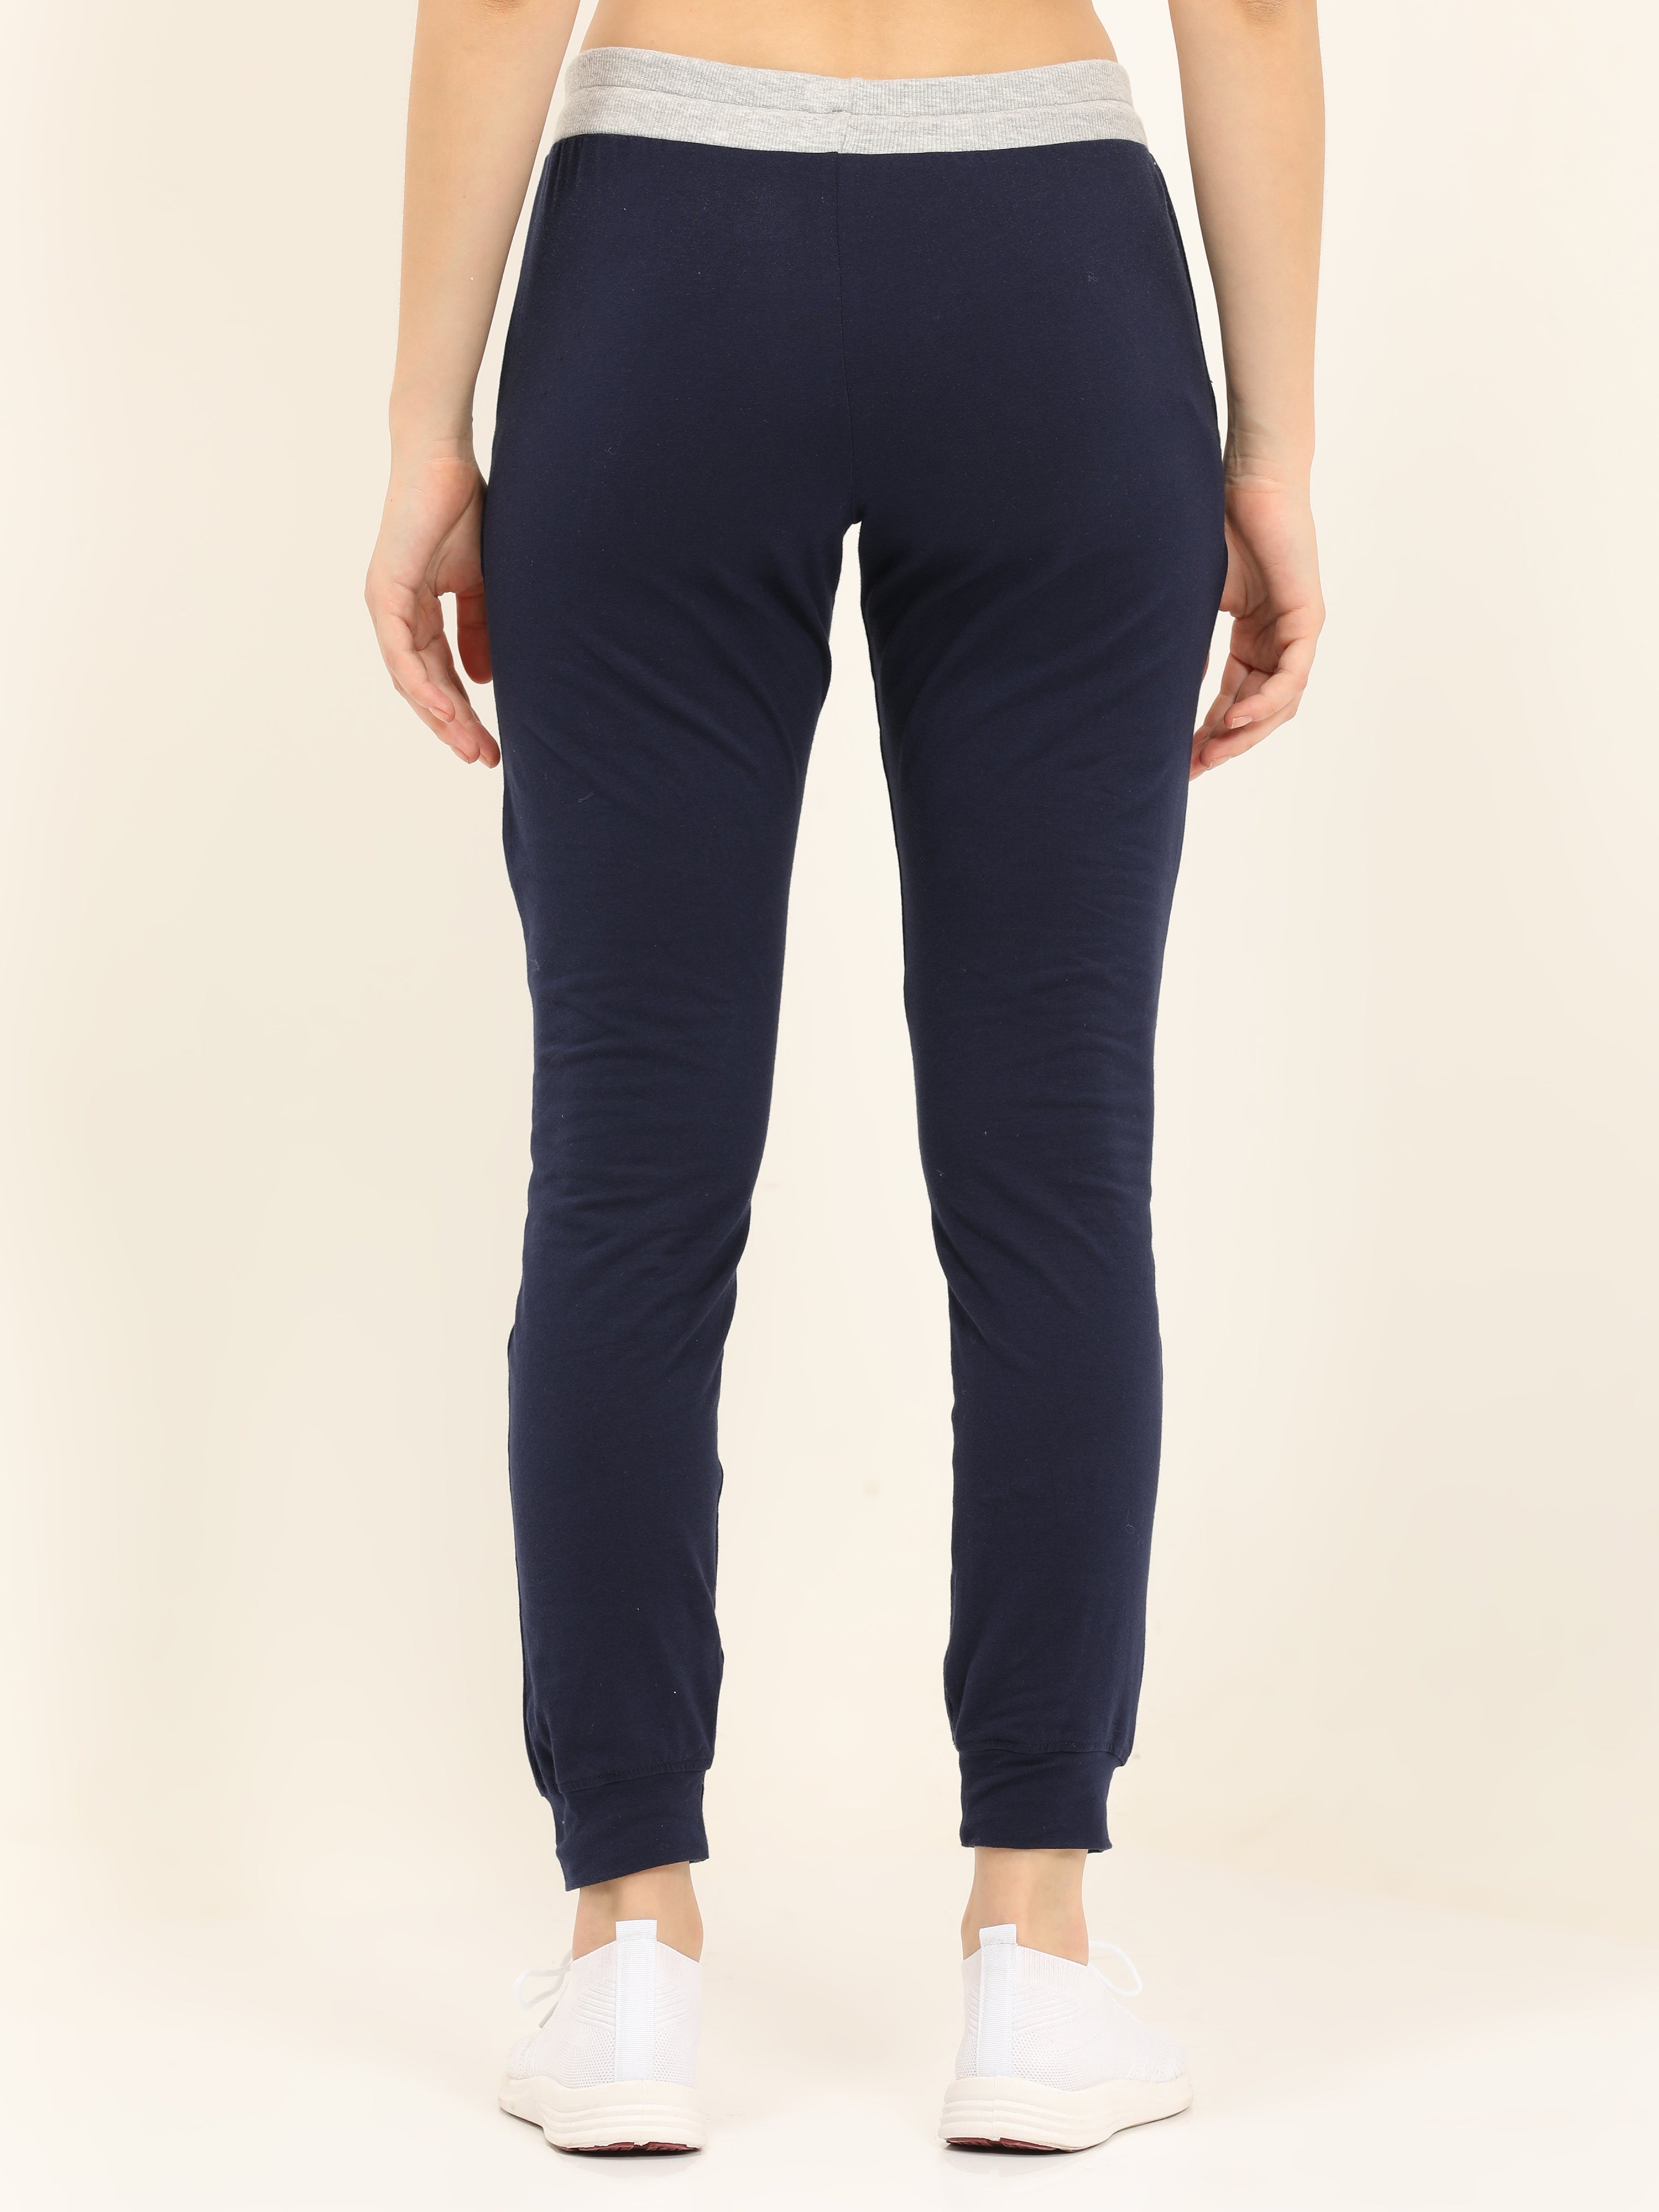 COTTON ON Slim Fit Track pant - Macy's